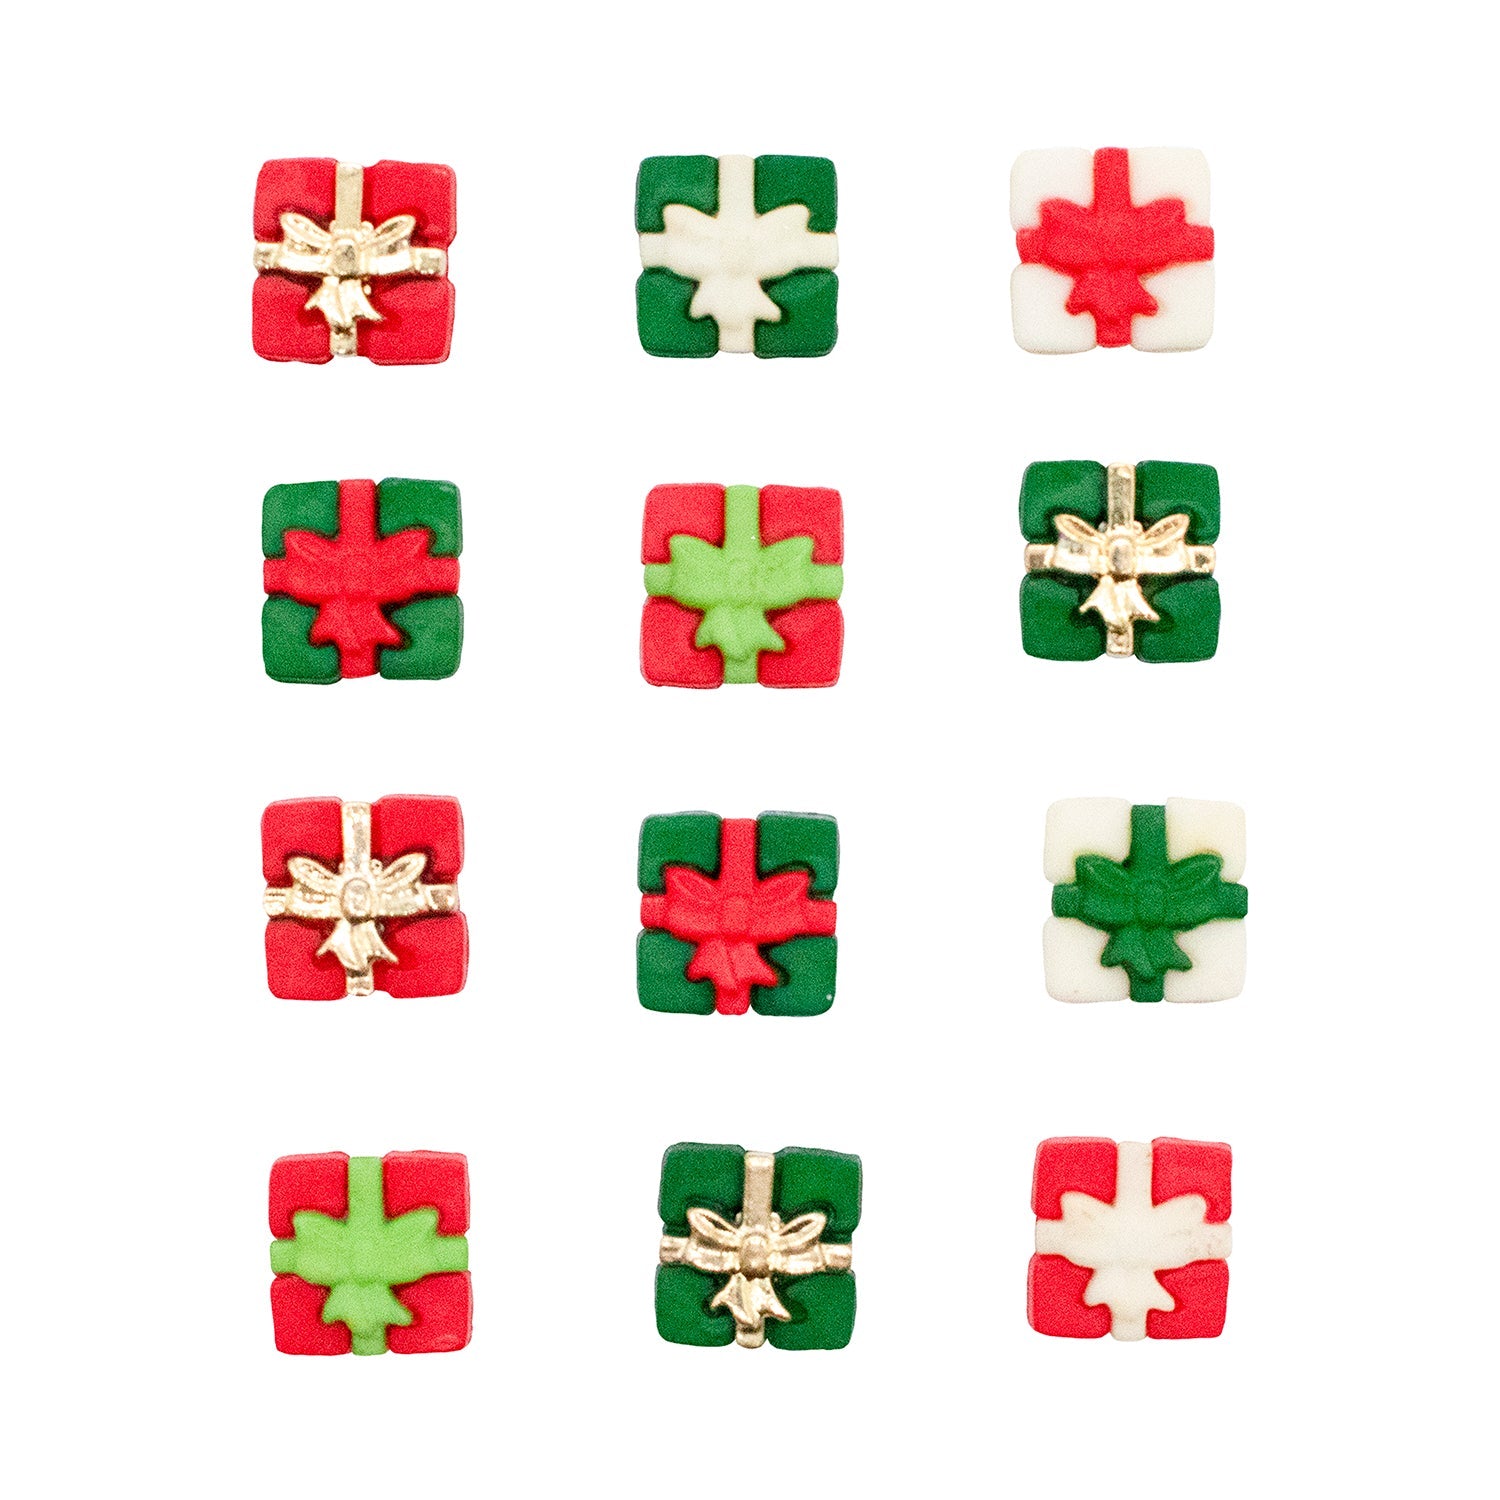 NOLITOY 200pcs Christmas Ornaments Painted Wooden Buttons Scrapbooking  Sewing Buttons Christmas Buttons for Crafts Buttons for Baby Clothes  Christmas